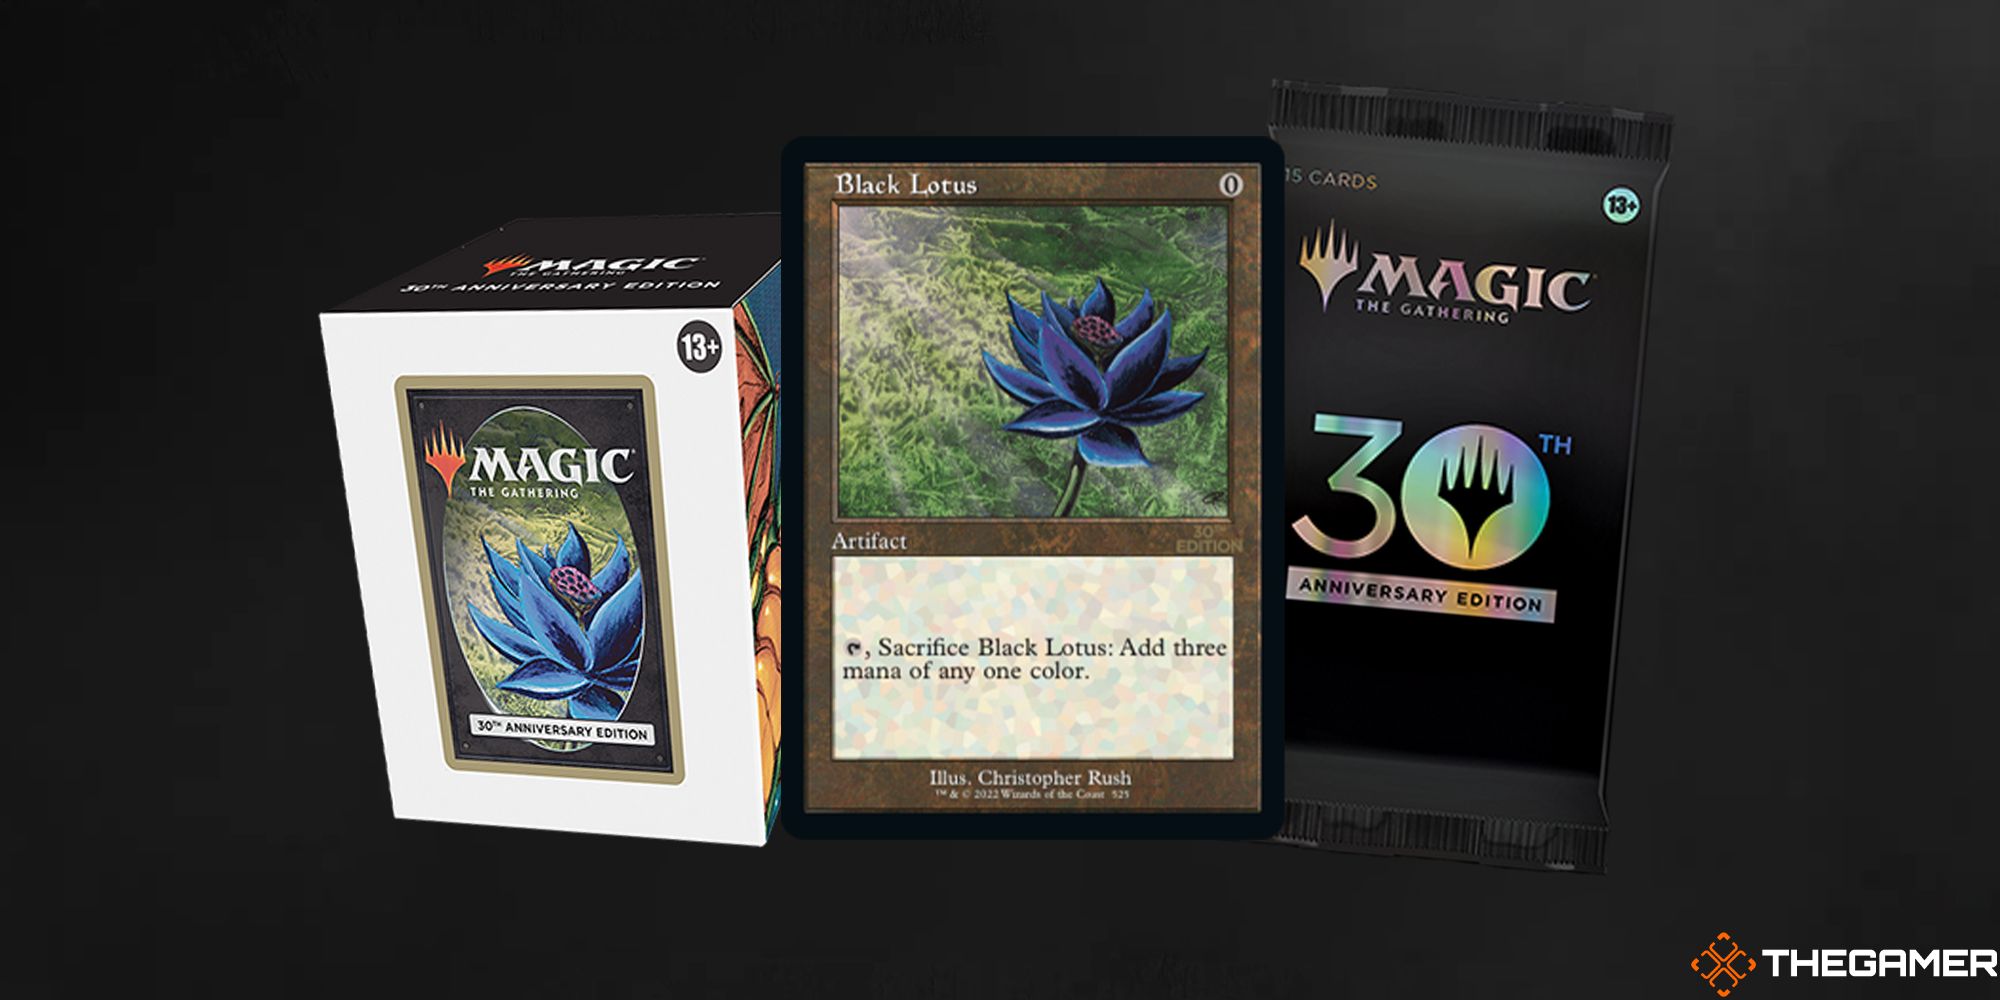 Magic: The Gathering's $999 30th Anniversary Edition Includes